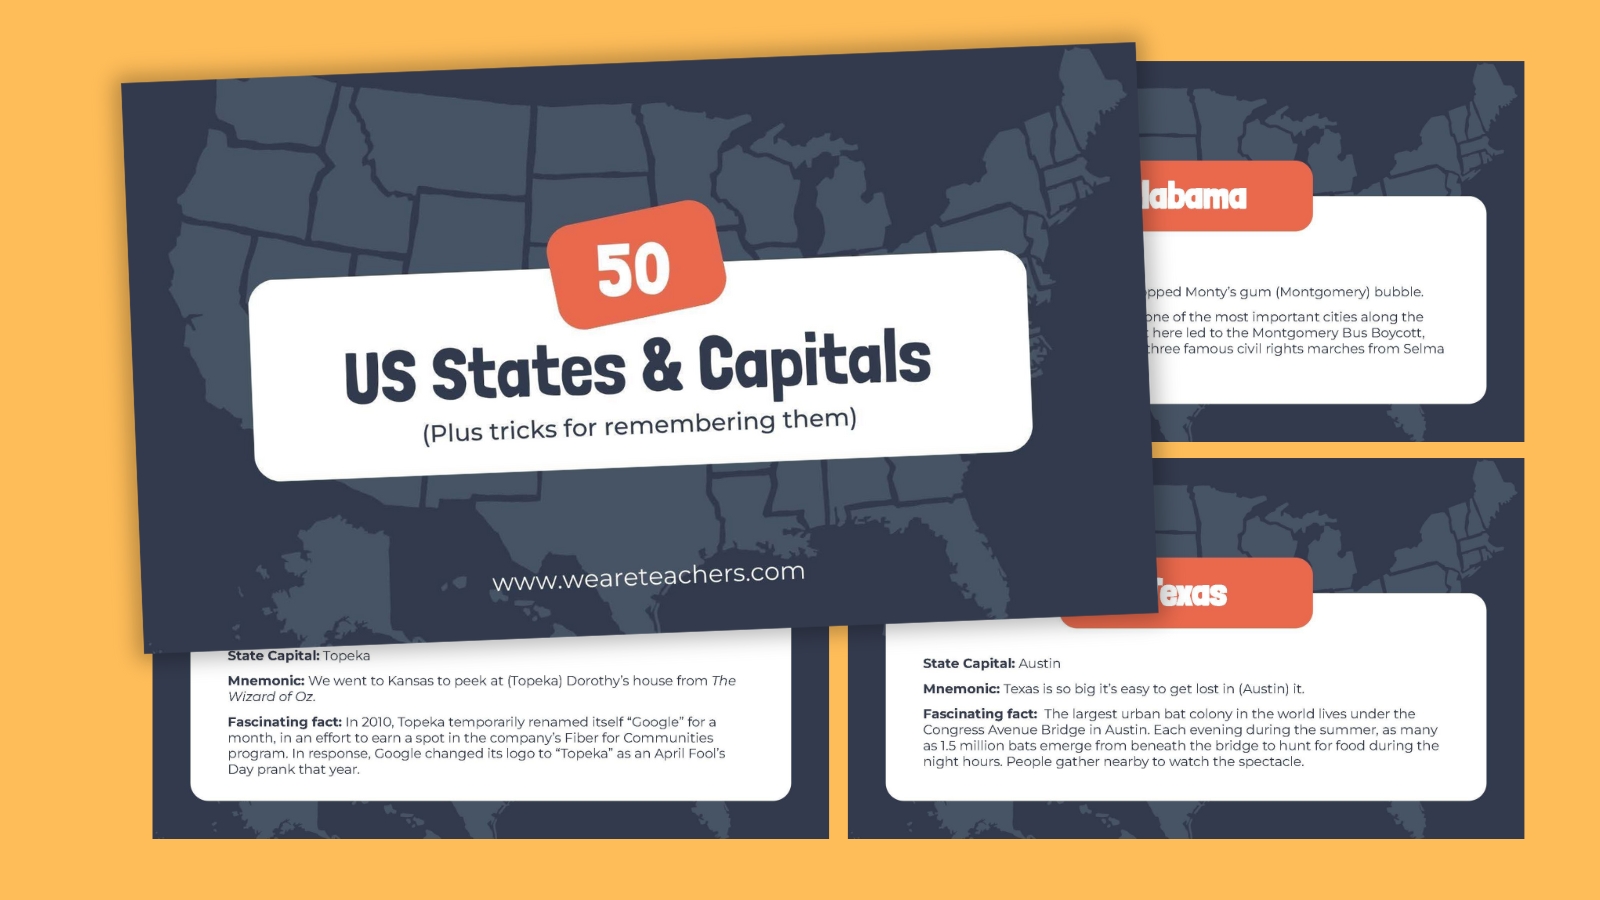 Example of slides from a Google Slides deck featuring the 50 U.S. states and capitals.